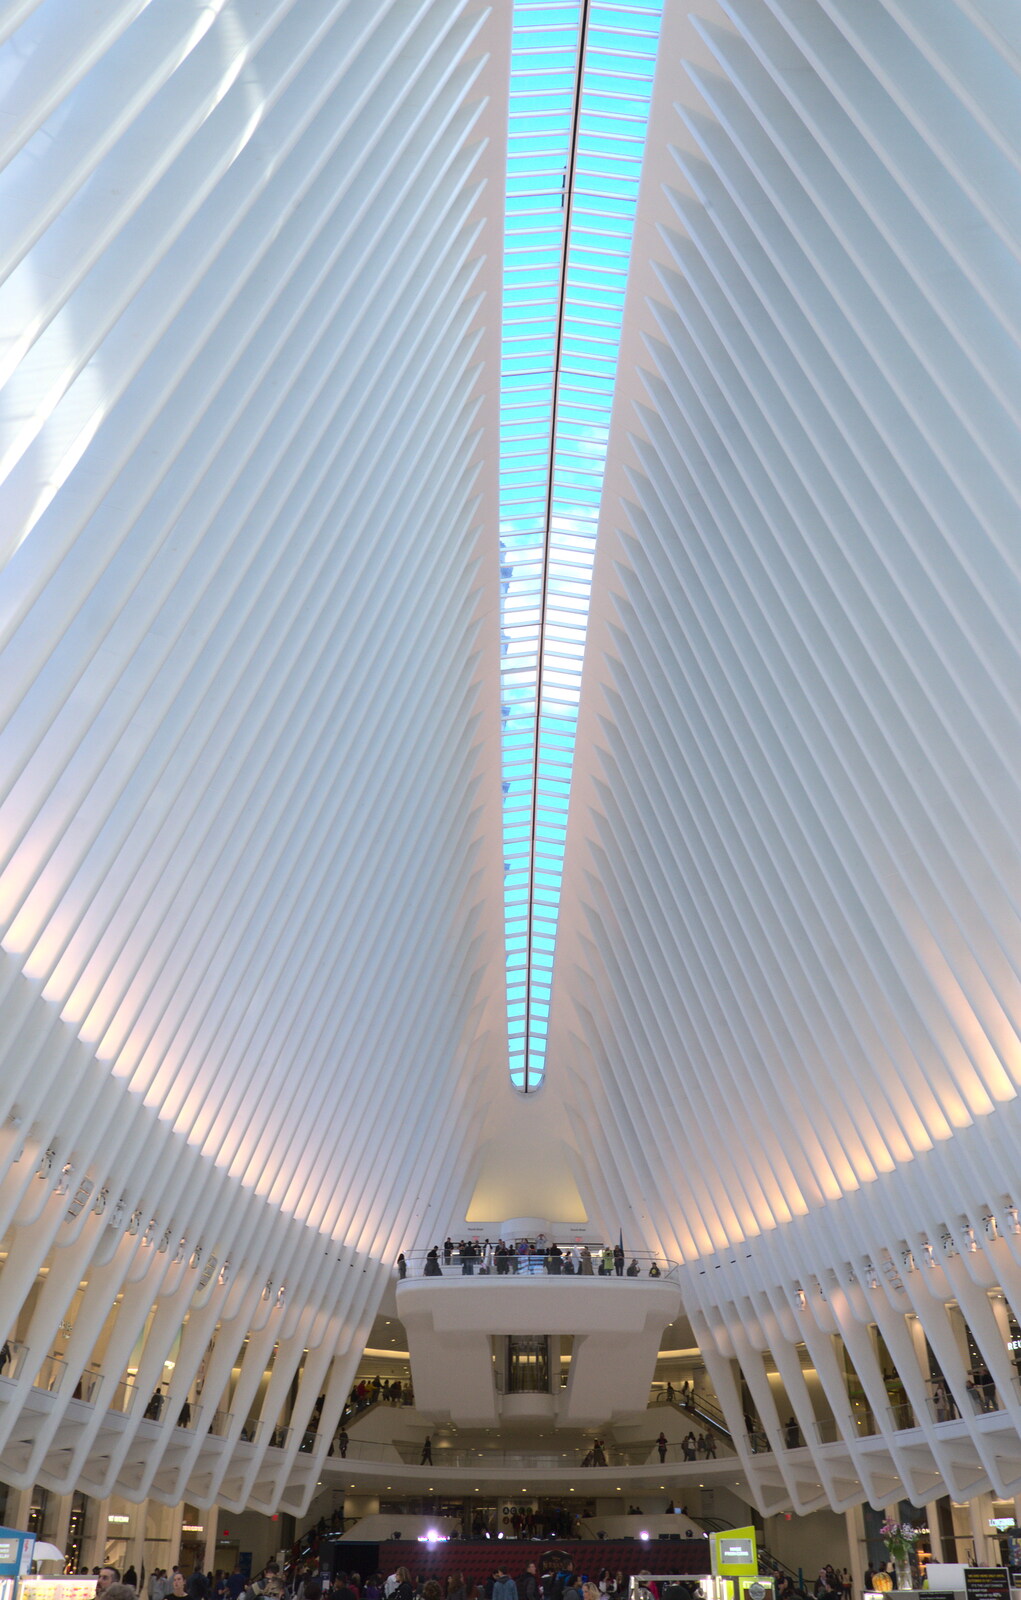 The Occulus is like a big rib cage from The Liberty Cruise and One World Trade Center, New York, United States - 23rd October 2018